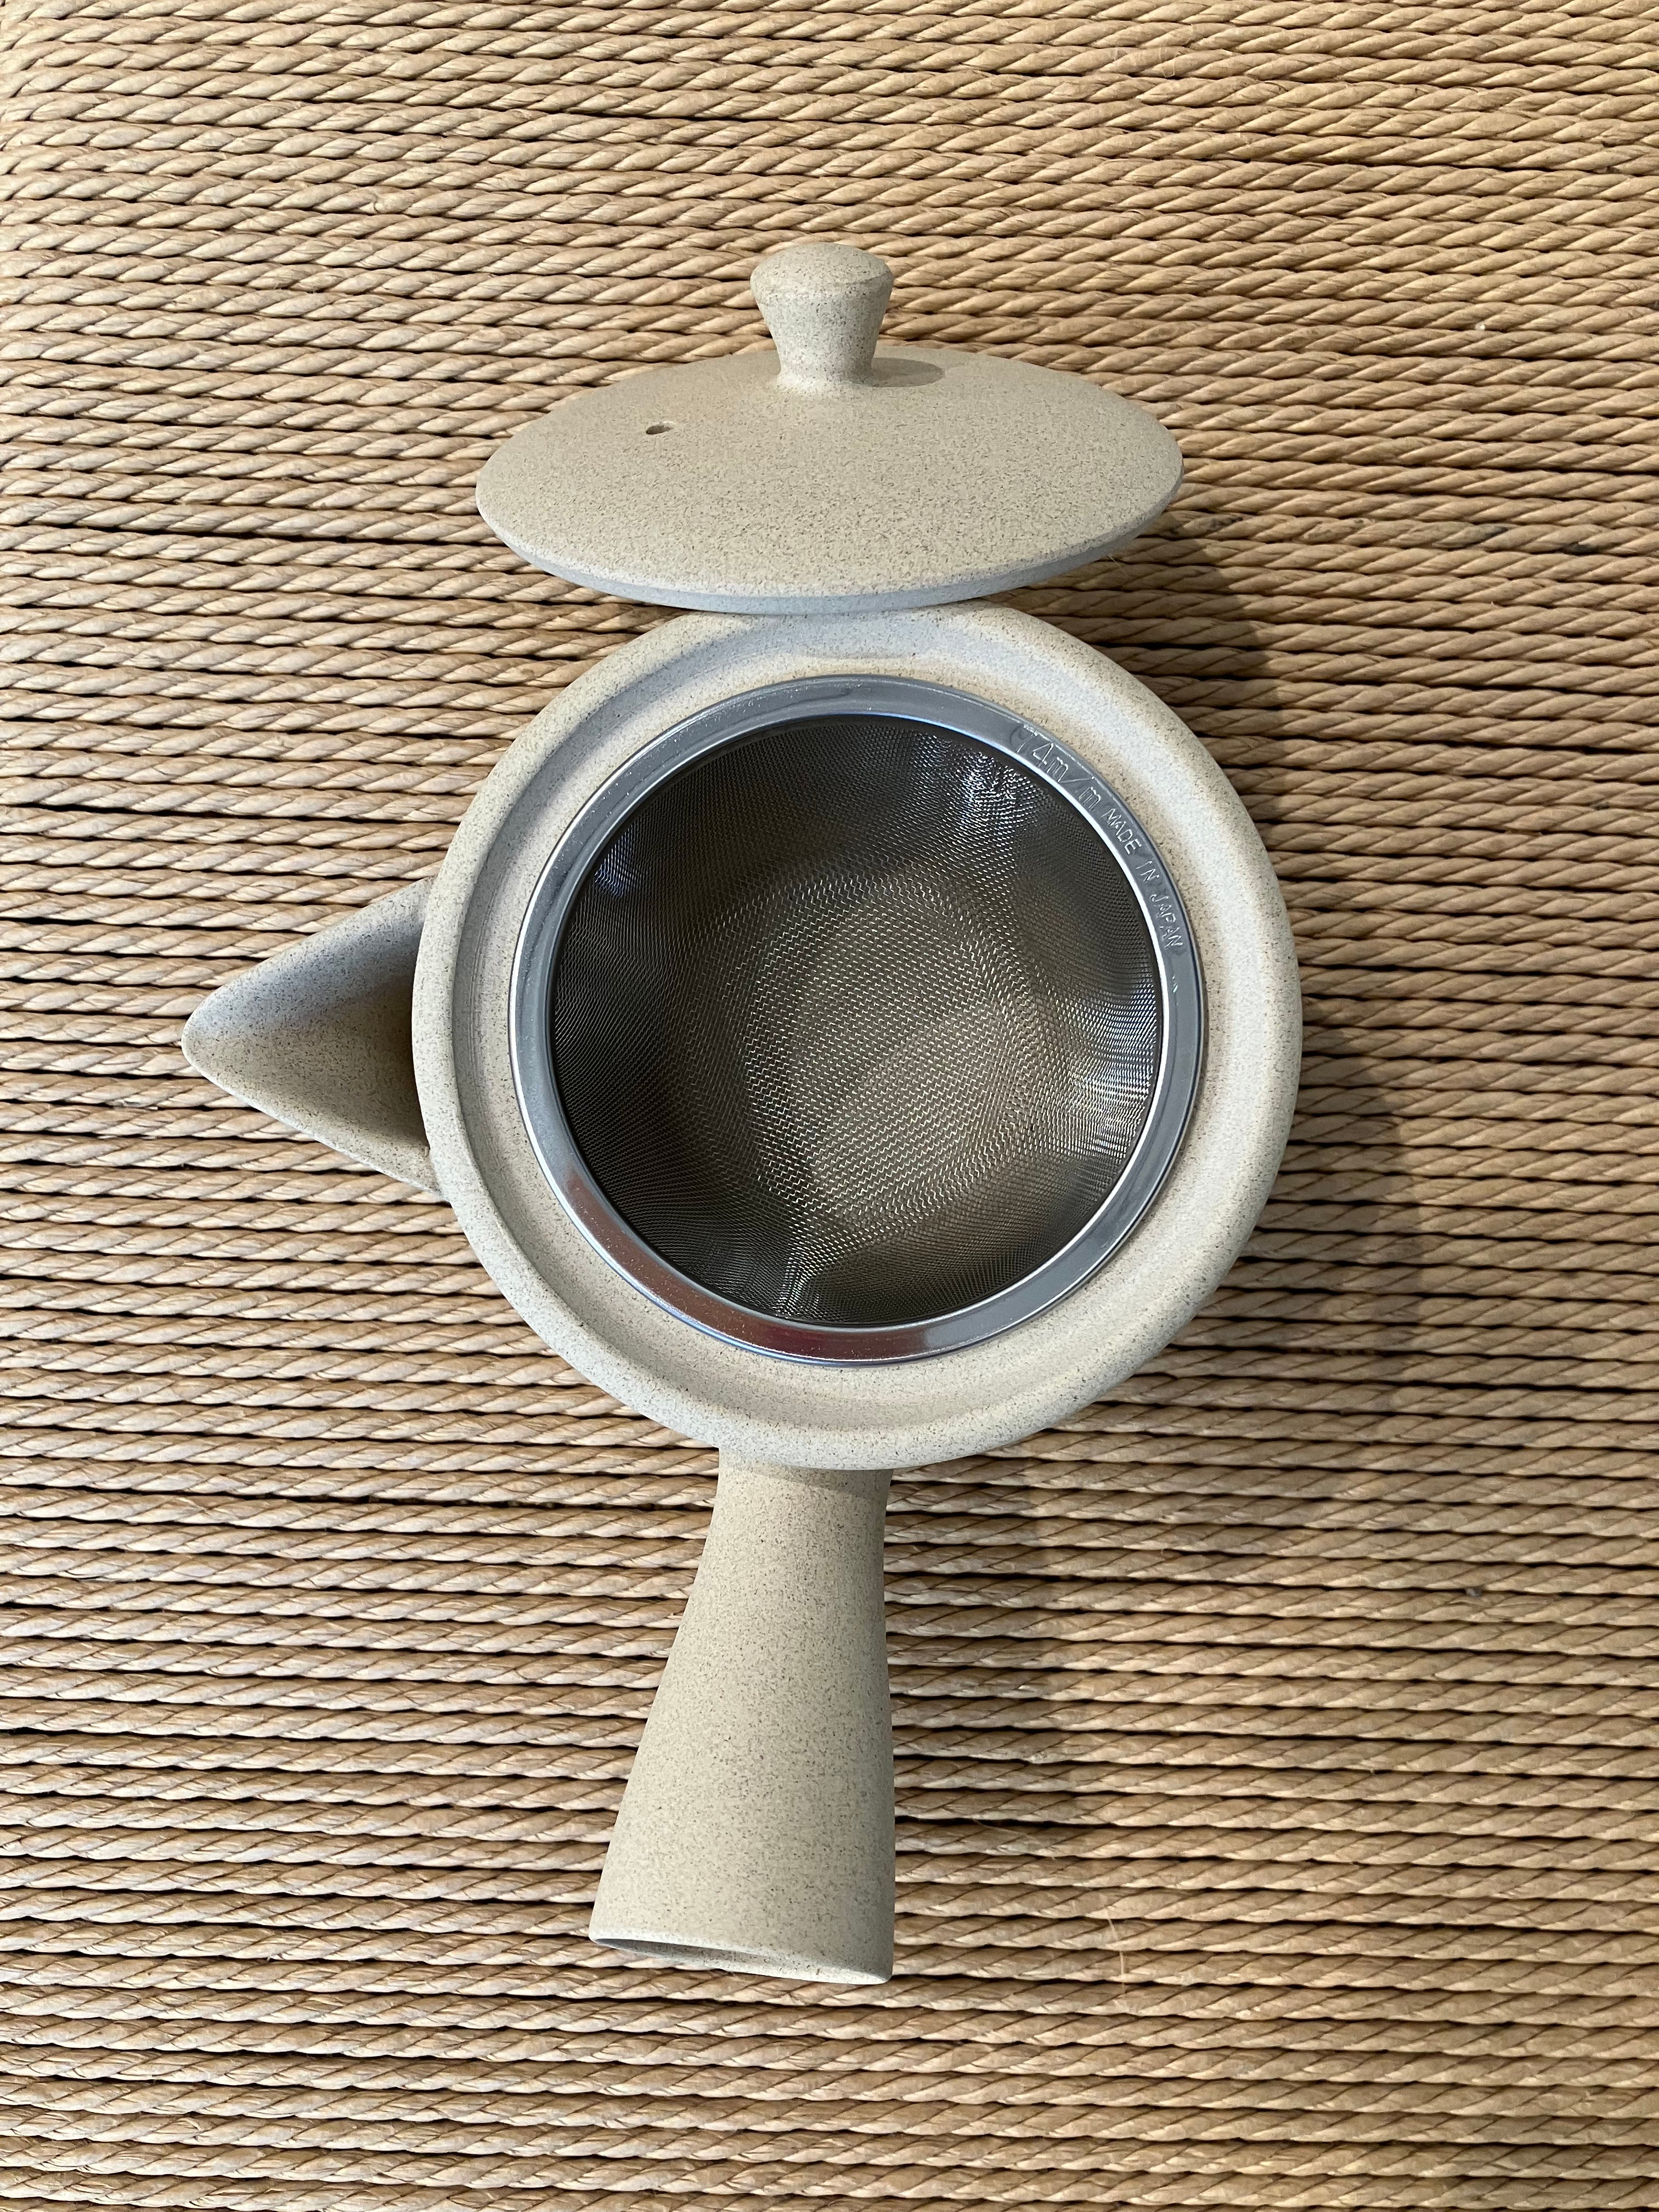 Small Japanese teapot in sand-coloured stoneware